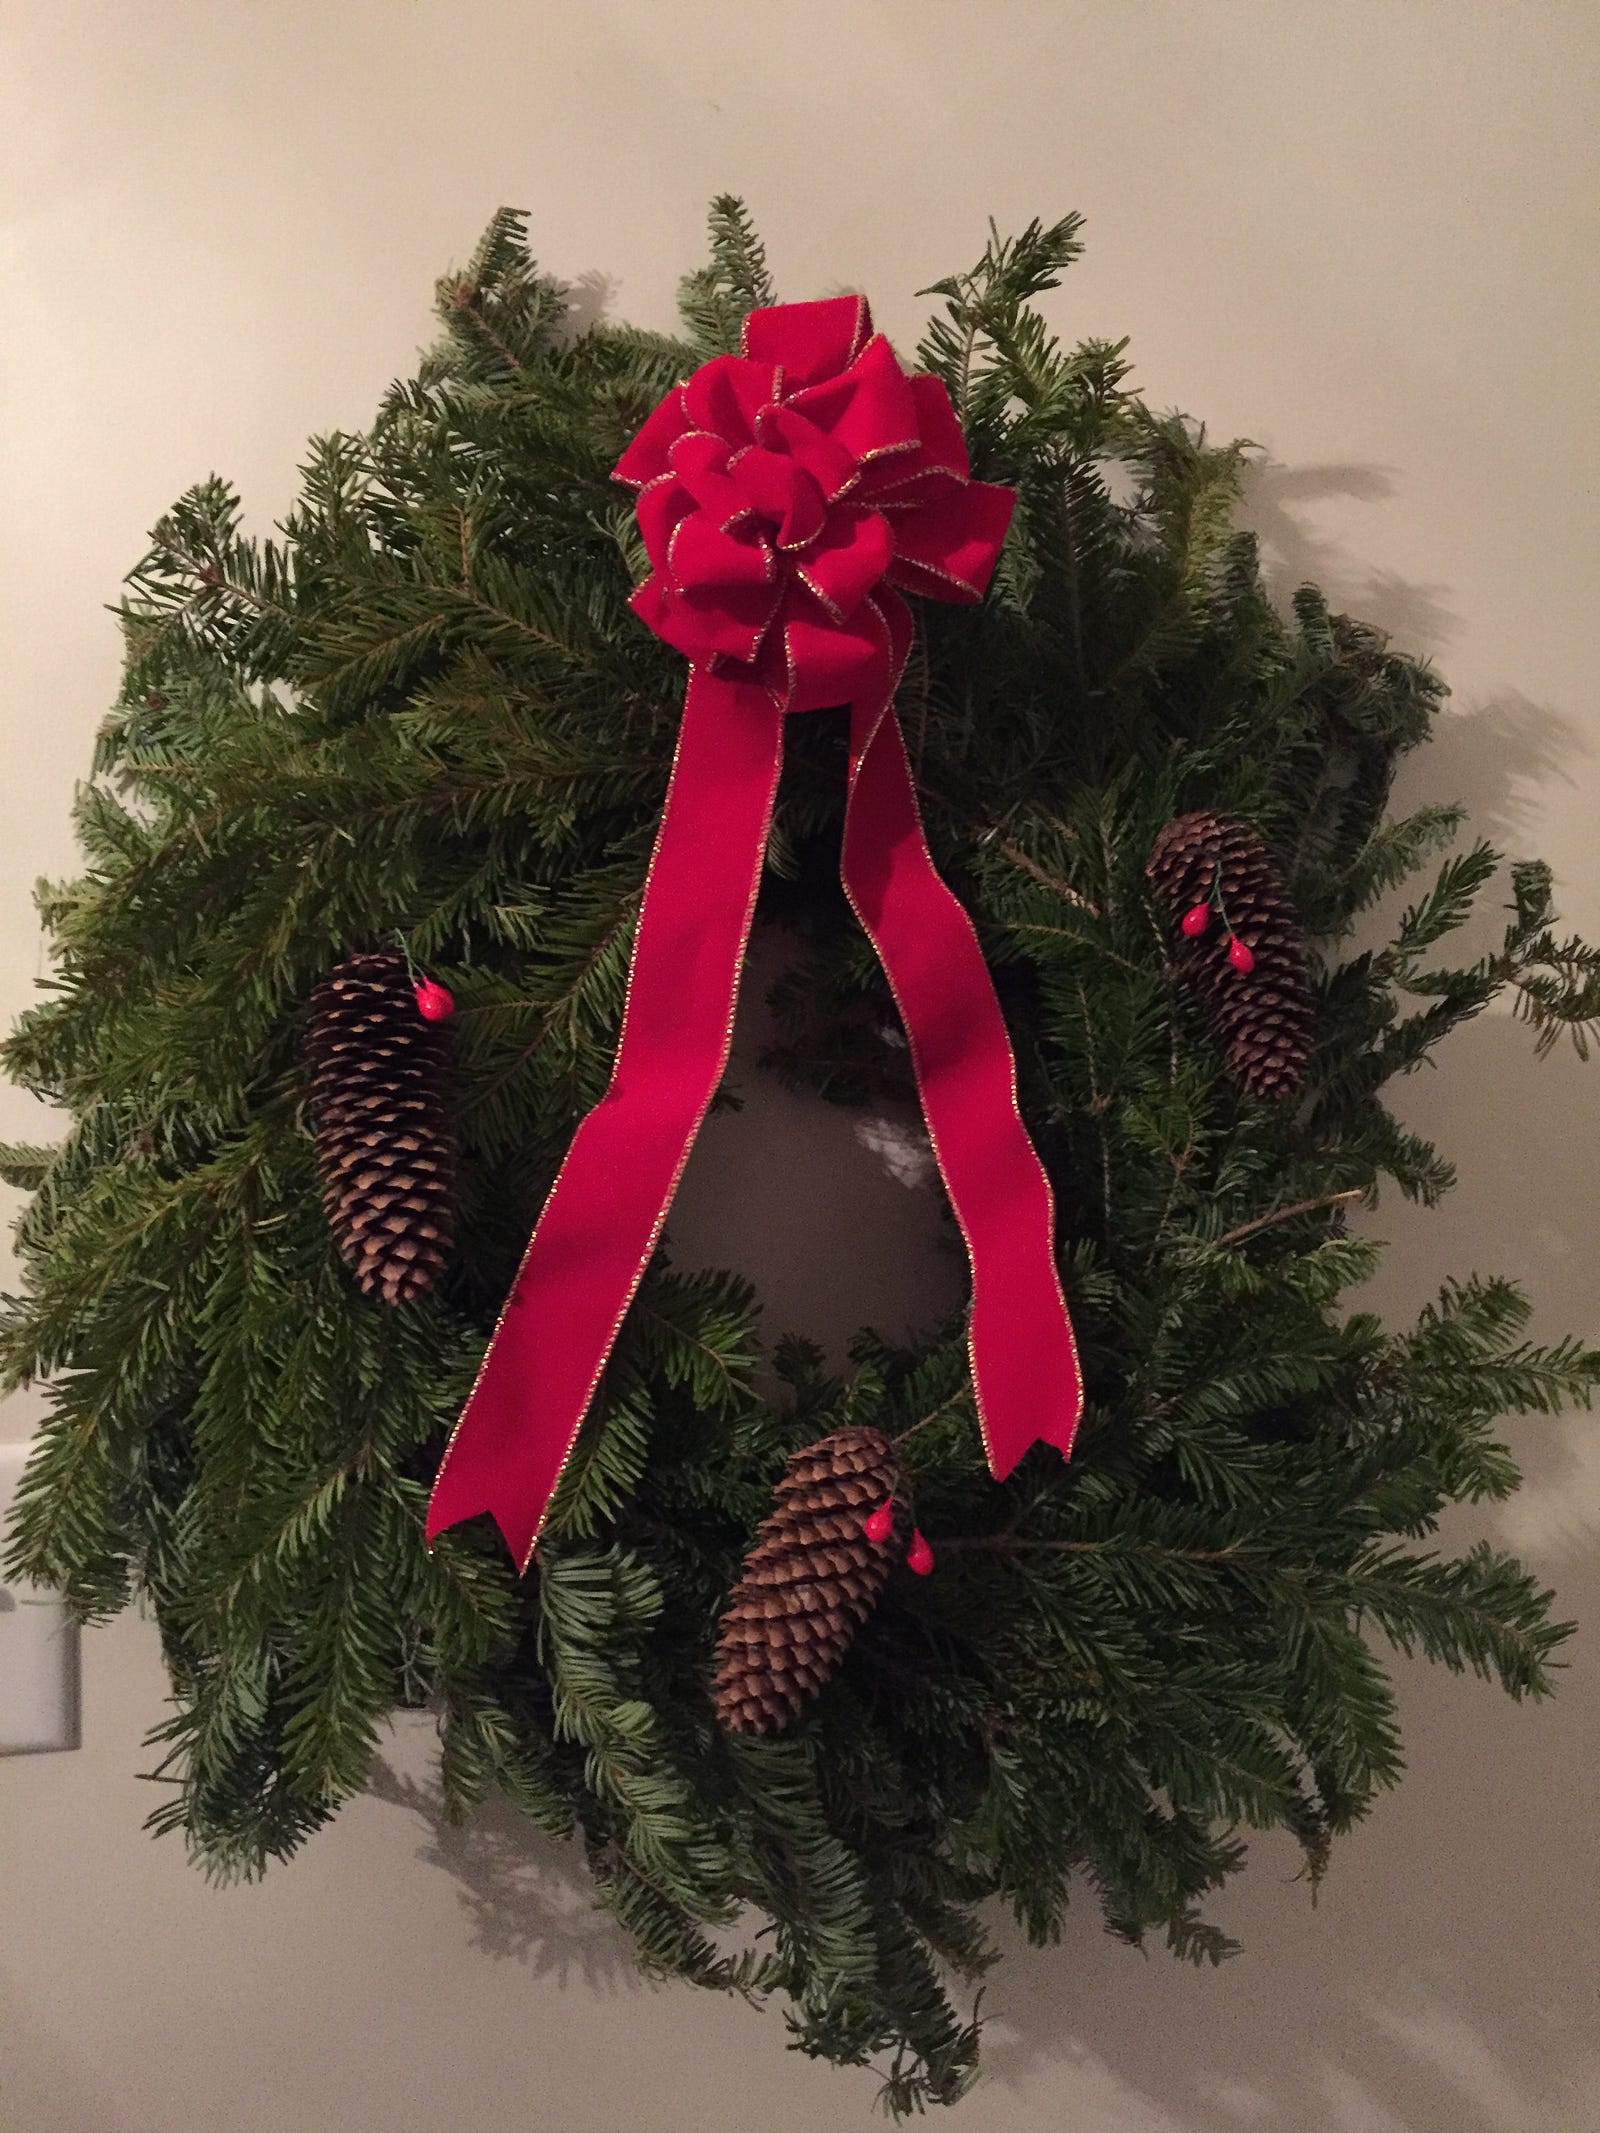 Boy Scout Troop 166 to sell Christmas wreaths on Sunday